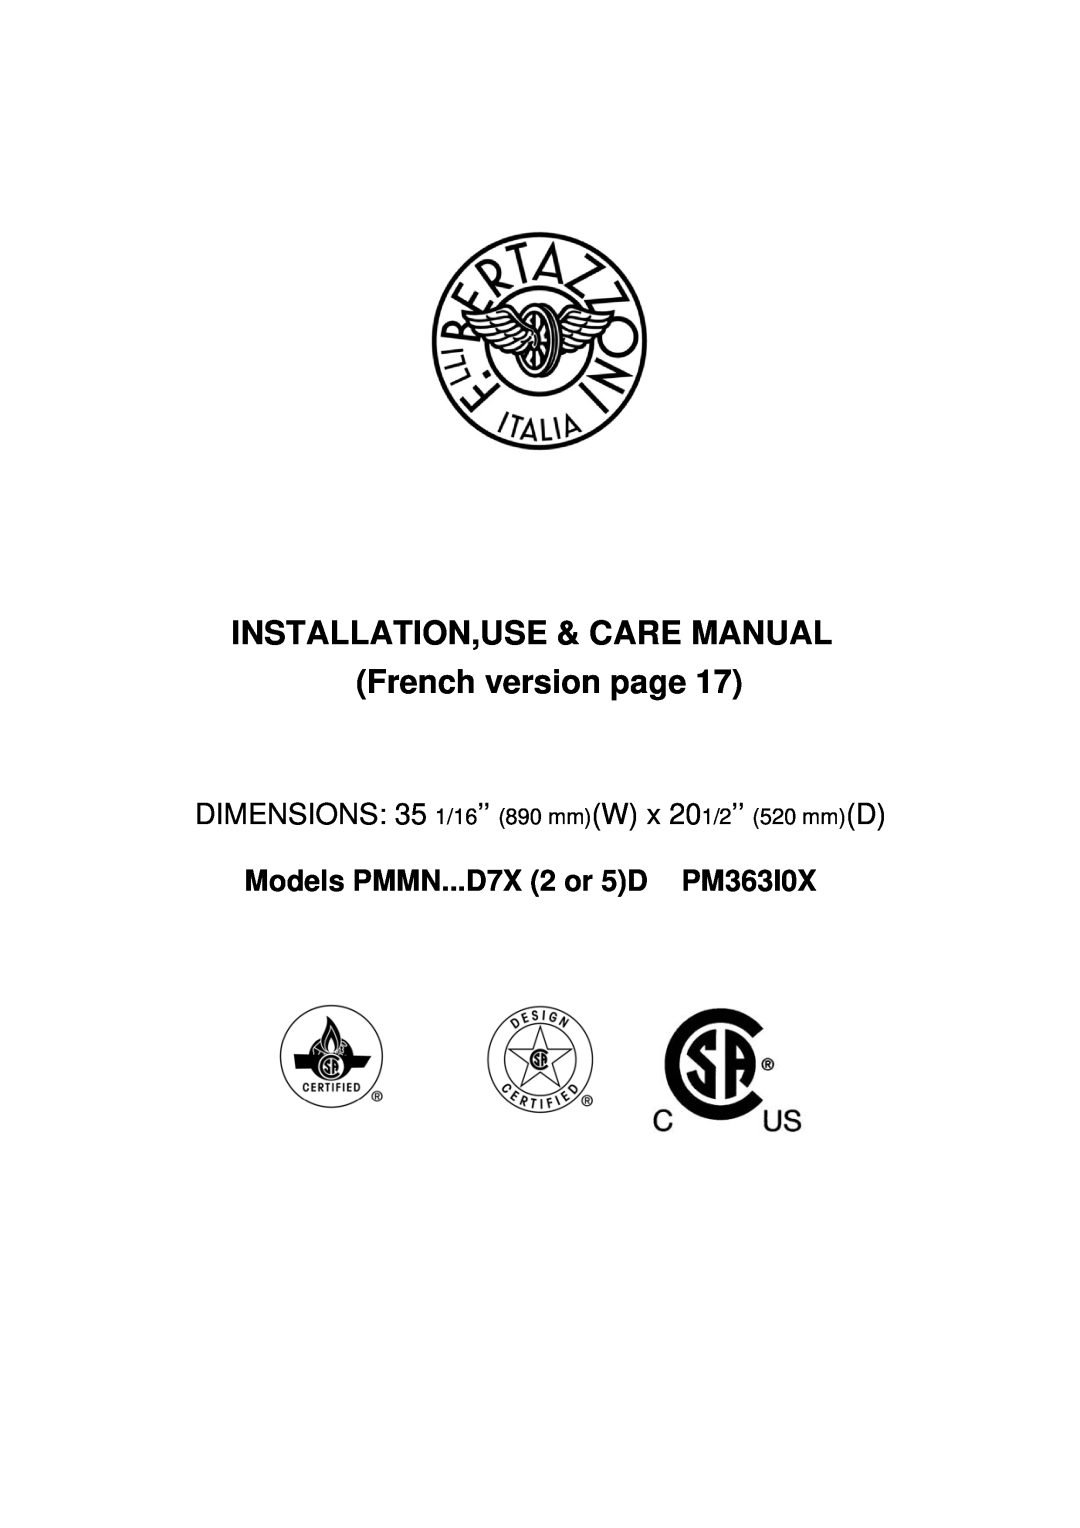 Bertazzoni dimensions INSTALLATION,USE & CARE MANUAL French version page, Models PMMN...D7X 2 or 5D PM363I0X 